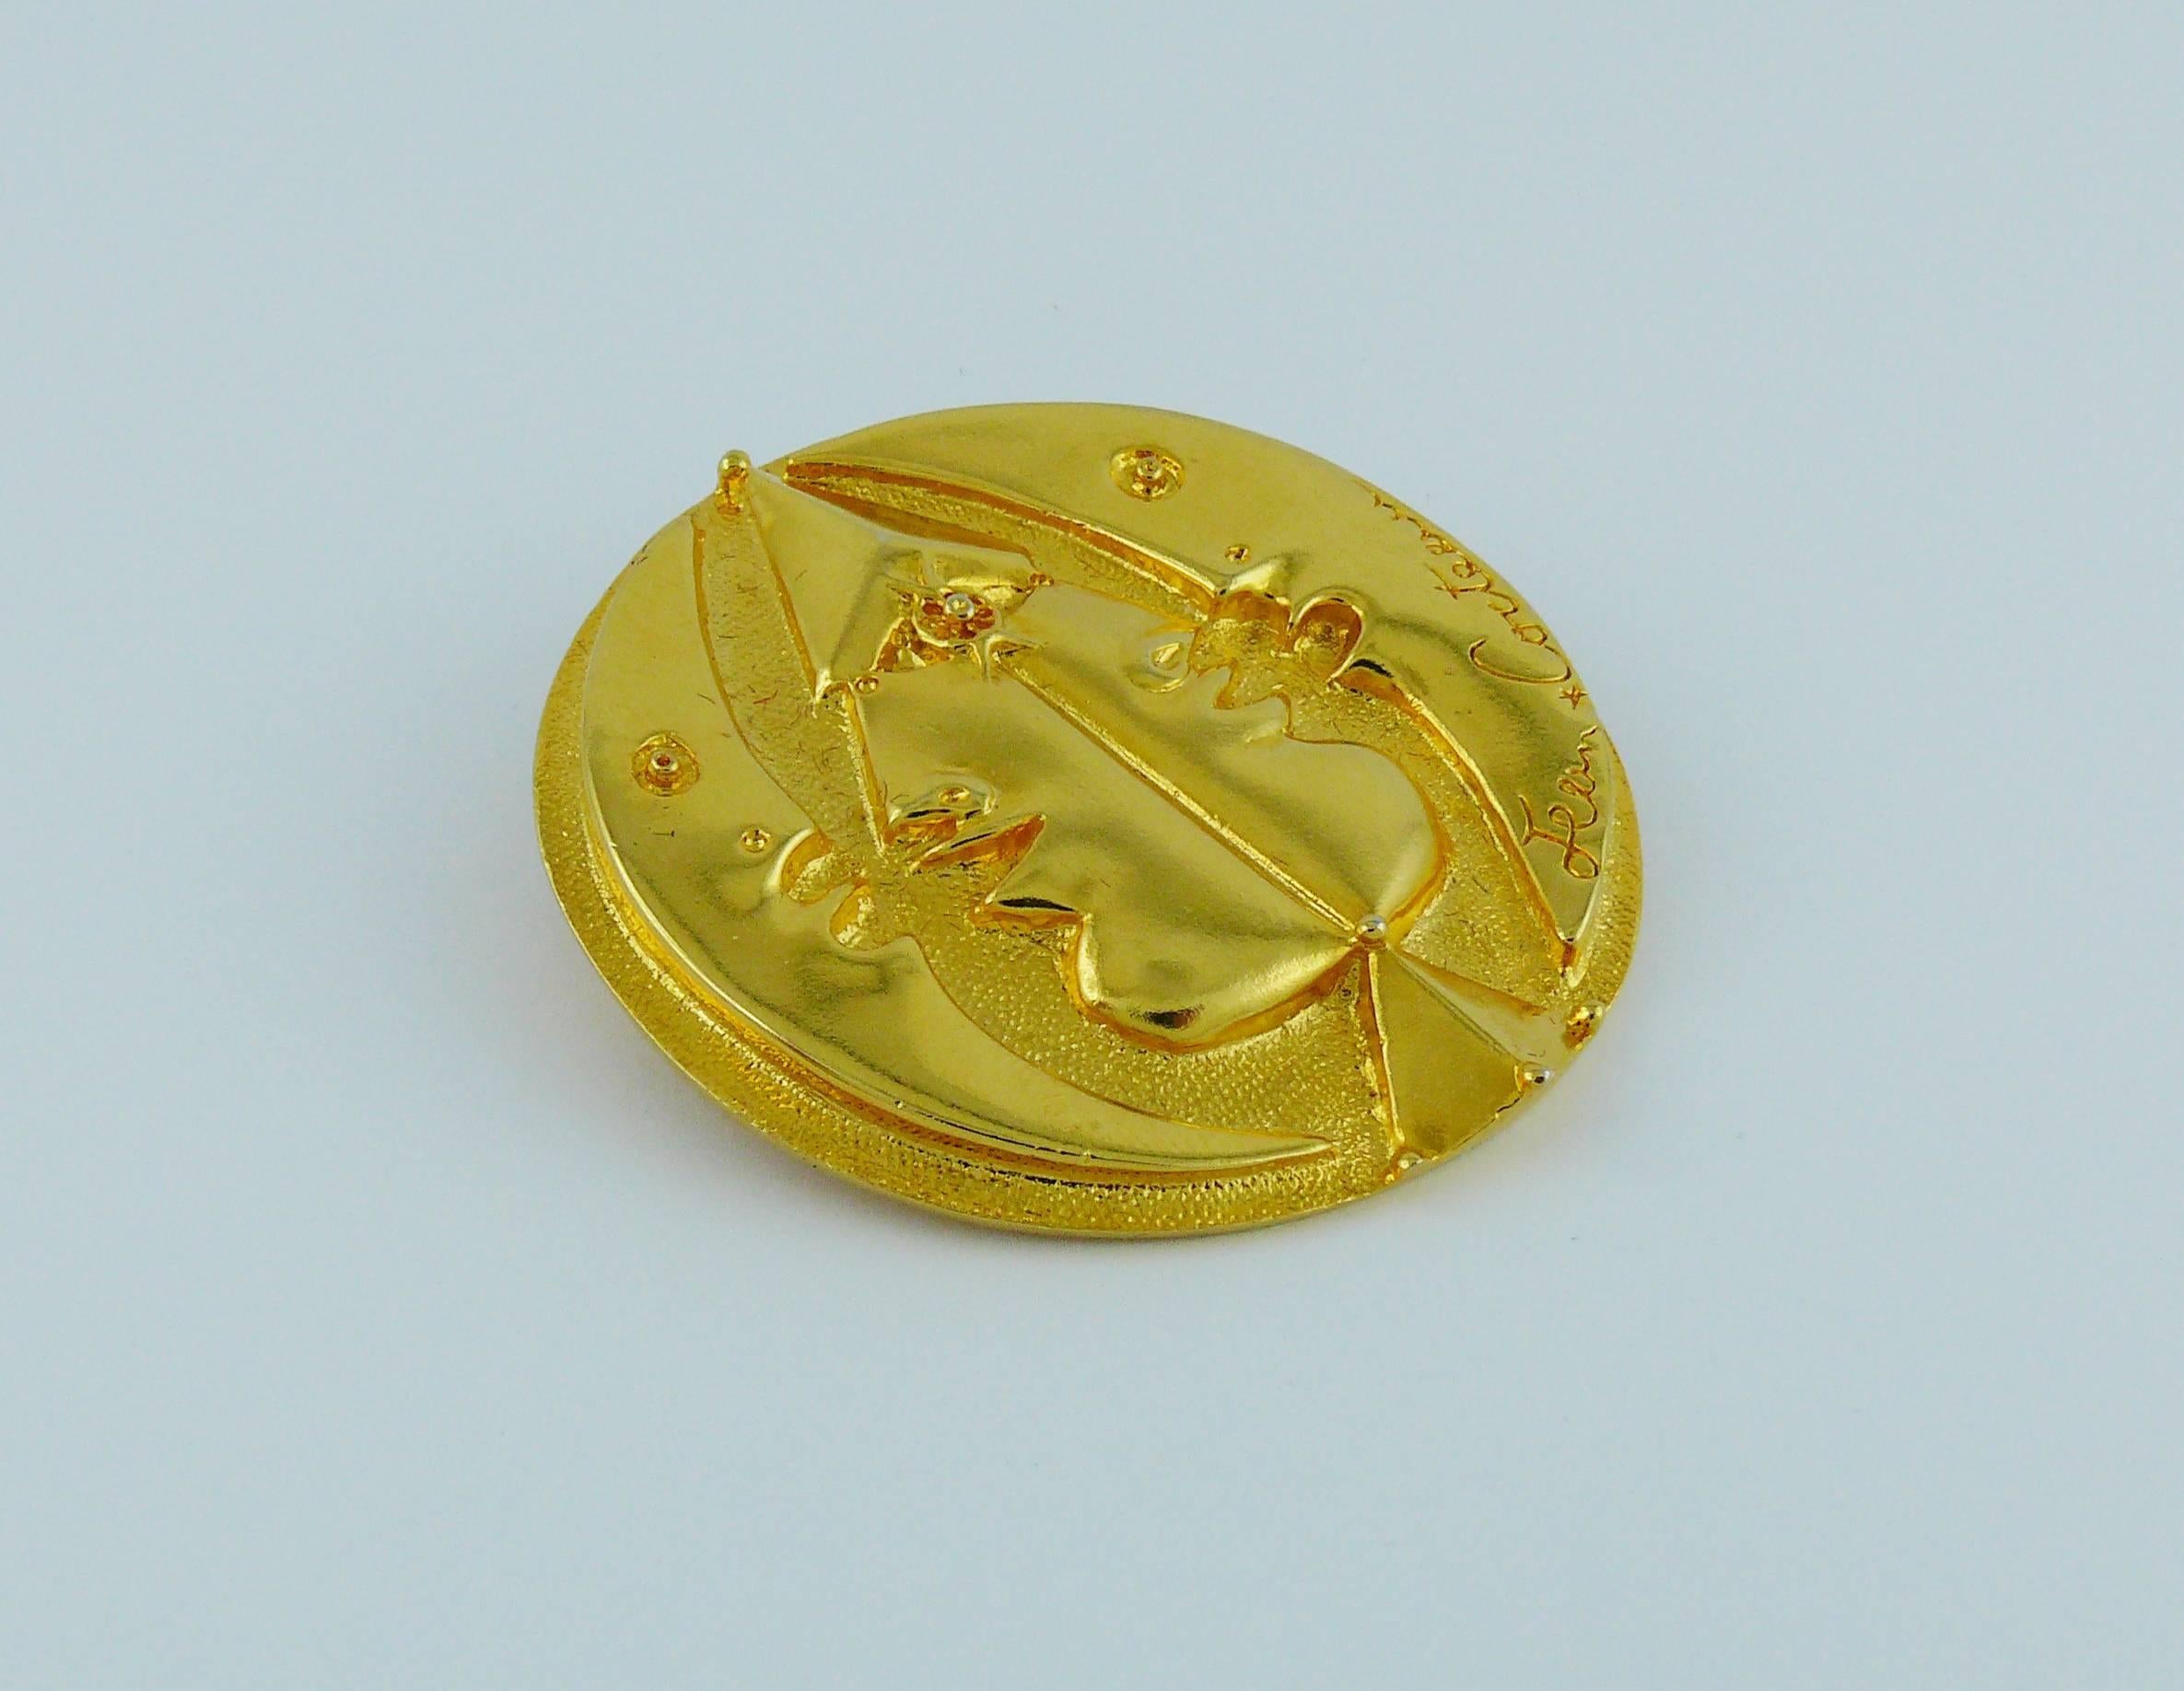 After JEAN COCTEAU gold toned brooch/pendant featuring crescent moons and profiles.

Embossed JEAN COCTEAU.
Marked on reverse COMITE JEAN COCTEAU A. MADELINE FLAMMARION © 1997.

Indicative measurements : diameter approx. 5.2 cm (2.05